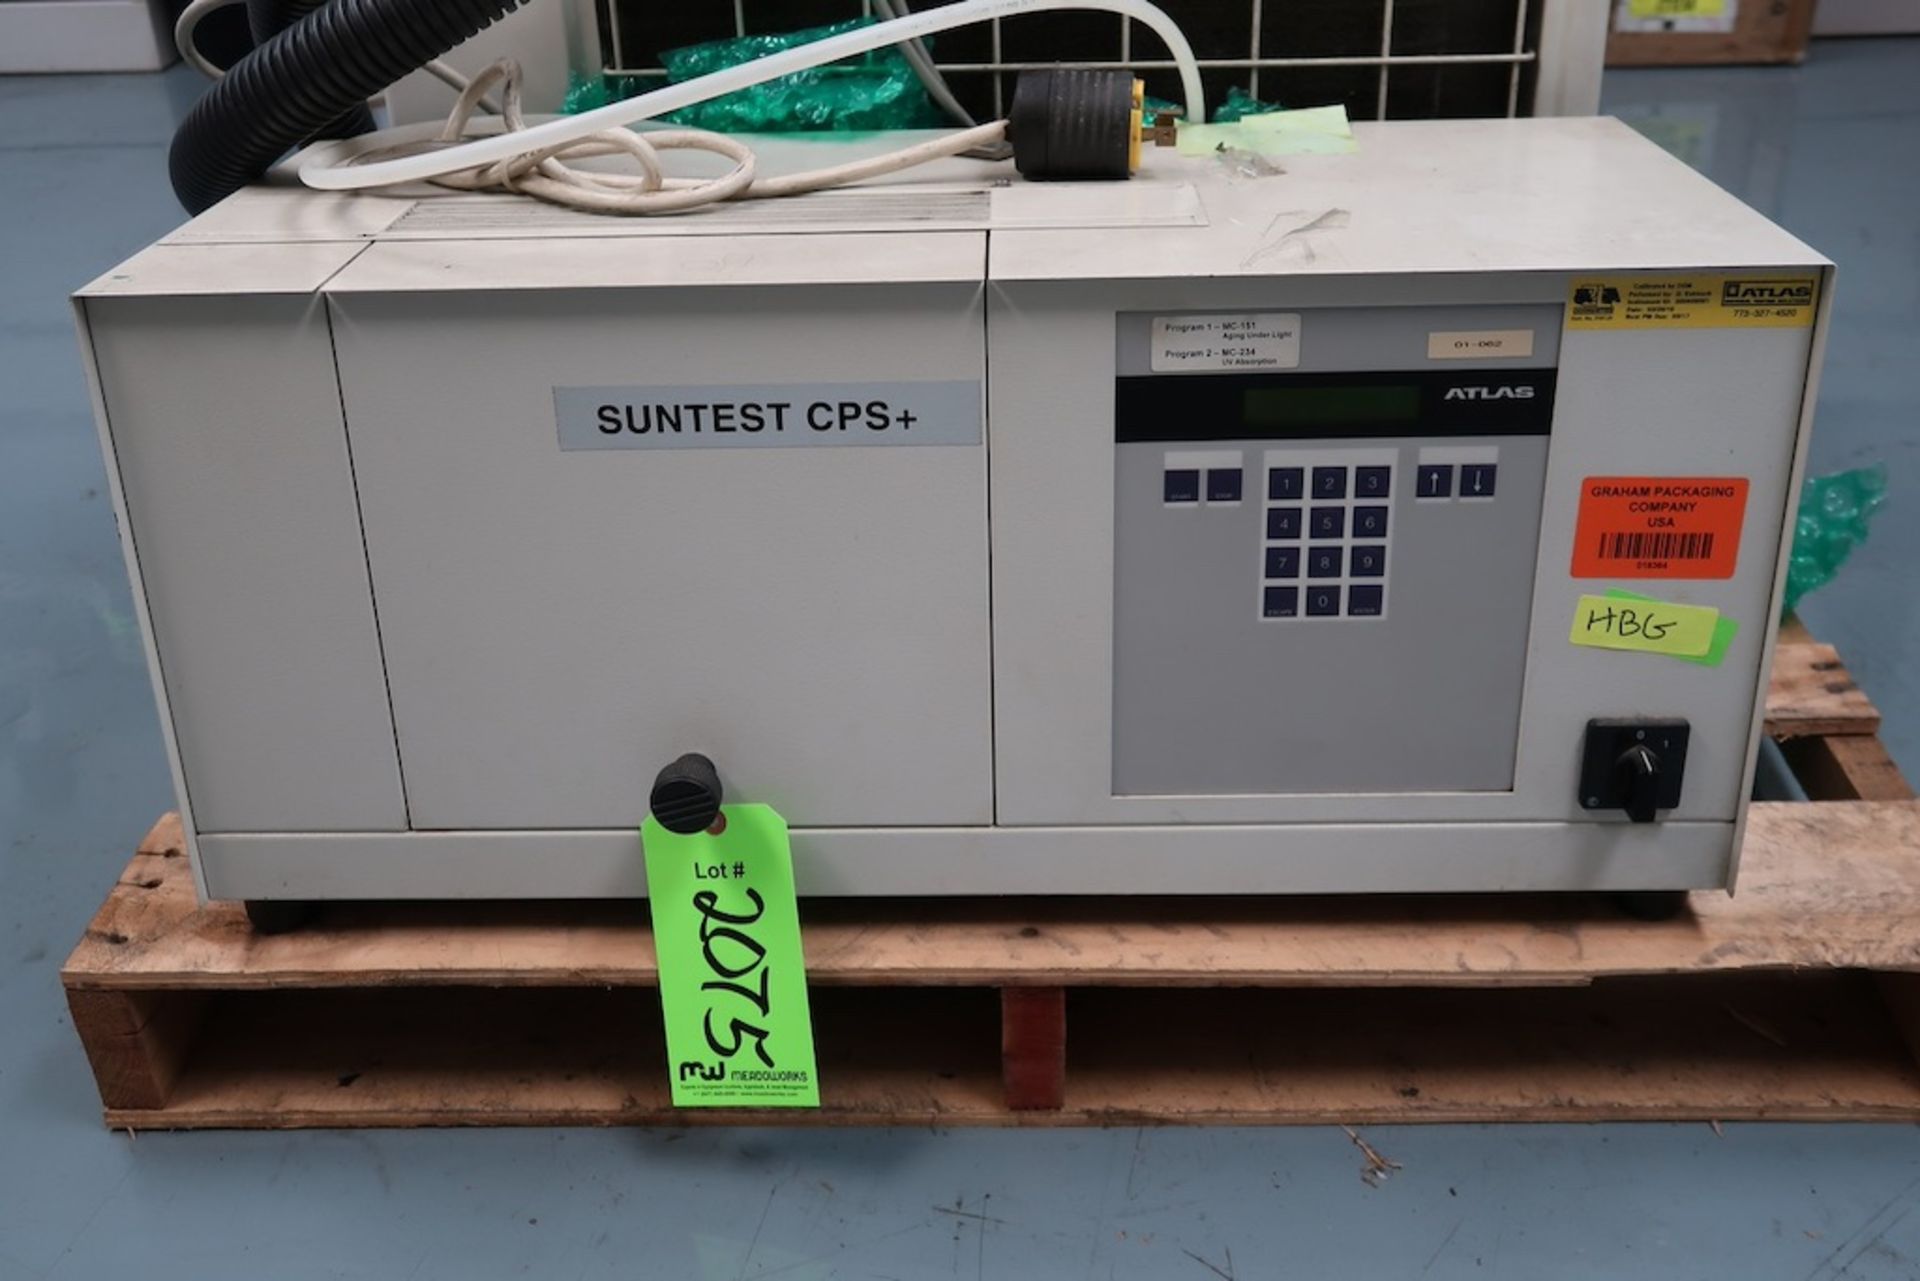 Atlas Material Testing Solutions Suntest CPS+ Weathering Instrument System - Image 2 of 5